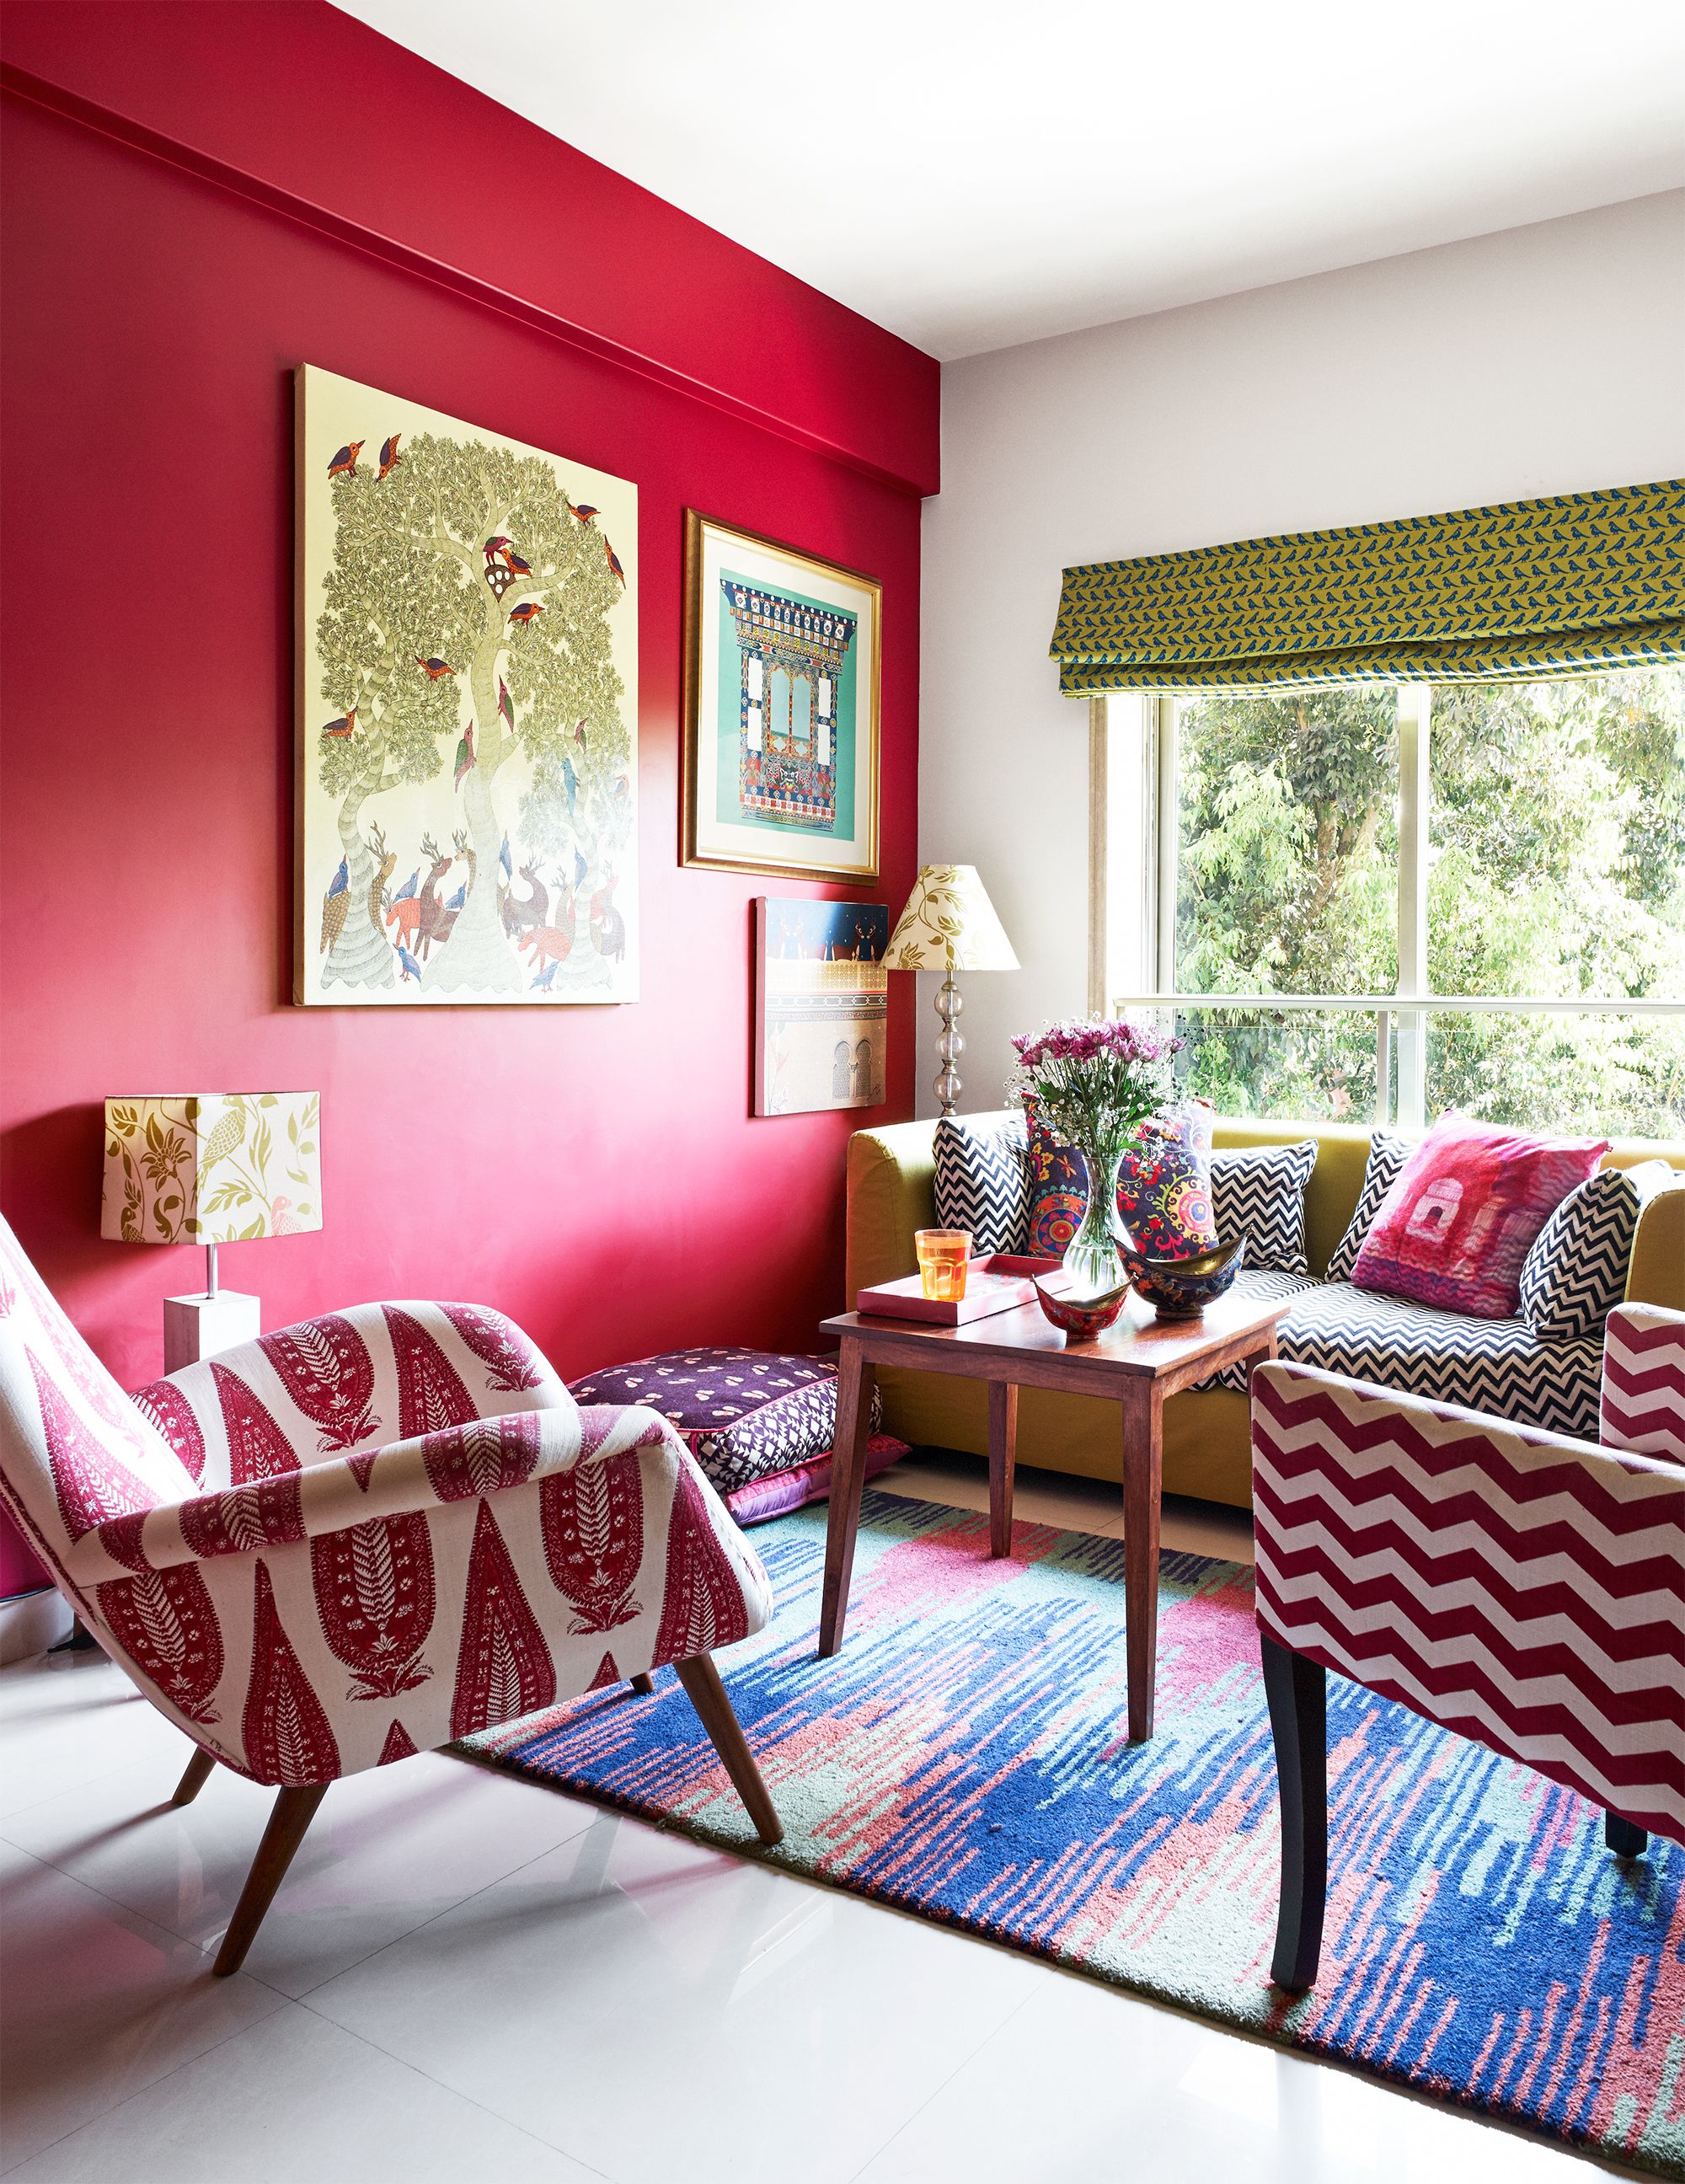 12 Best Living Room Color Ideas - Top Paint Colors for Living Rooms